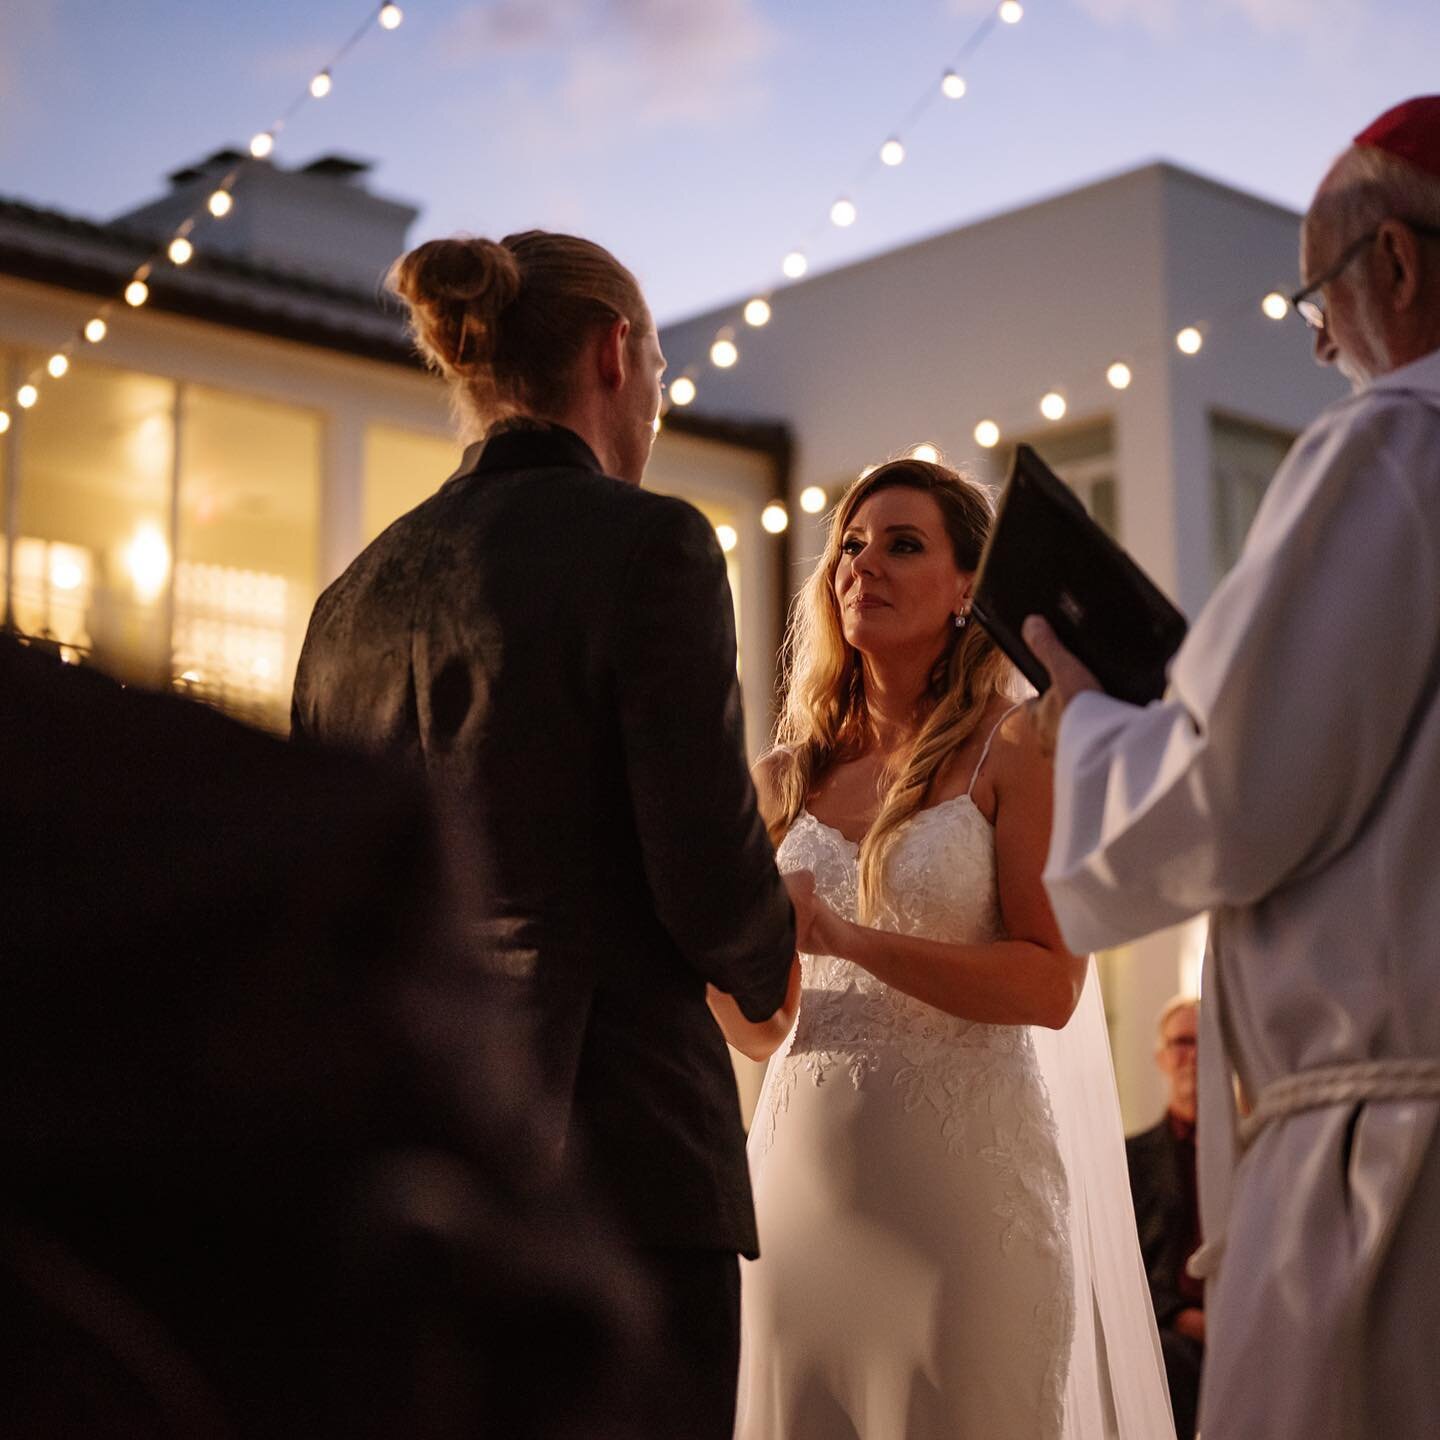 Tanya + Skyler&rsquo;s New Year&rsquo;s Eve Wedding was beautiful and fun and a completely new challenge for us. Their ceremony was just before sunset so it began during daylight and ended after dark. We were unsure of what to expect with such changi